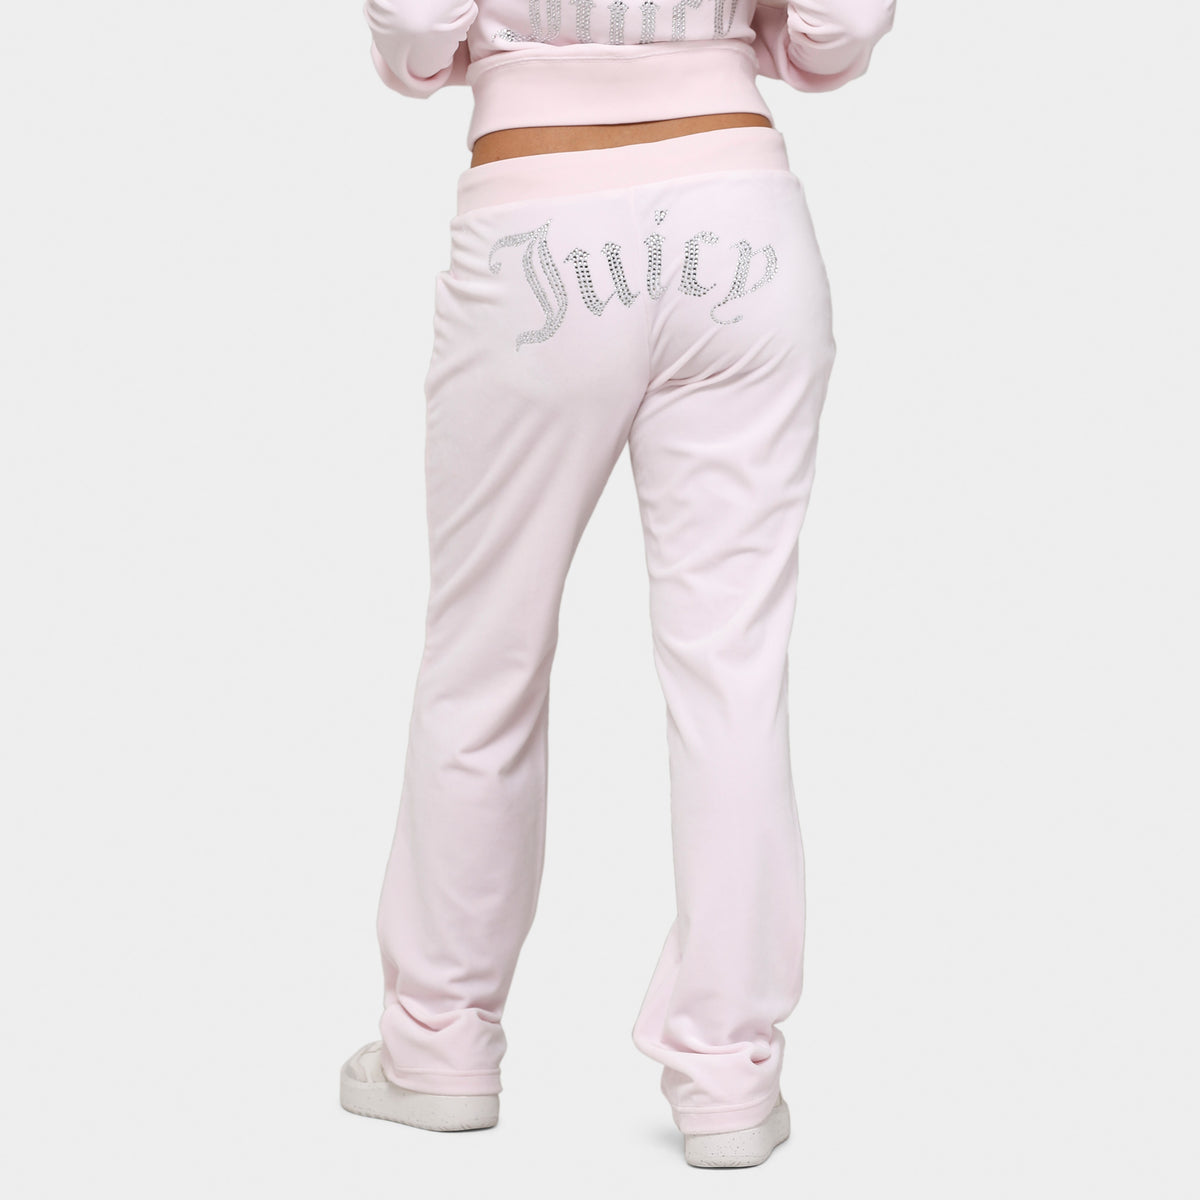 Juicy Couture Women's OG Big Bling Velour Track Pants / Soft Glow